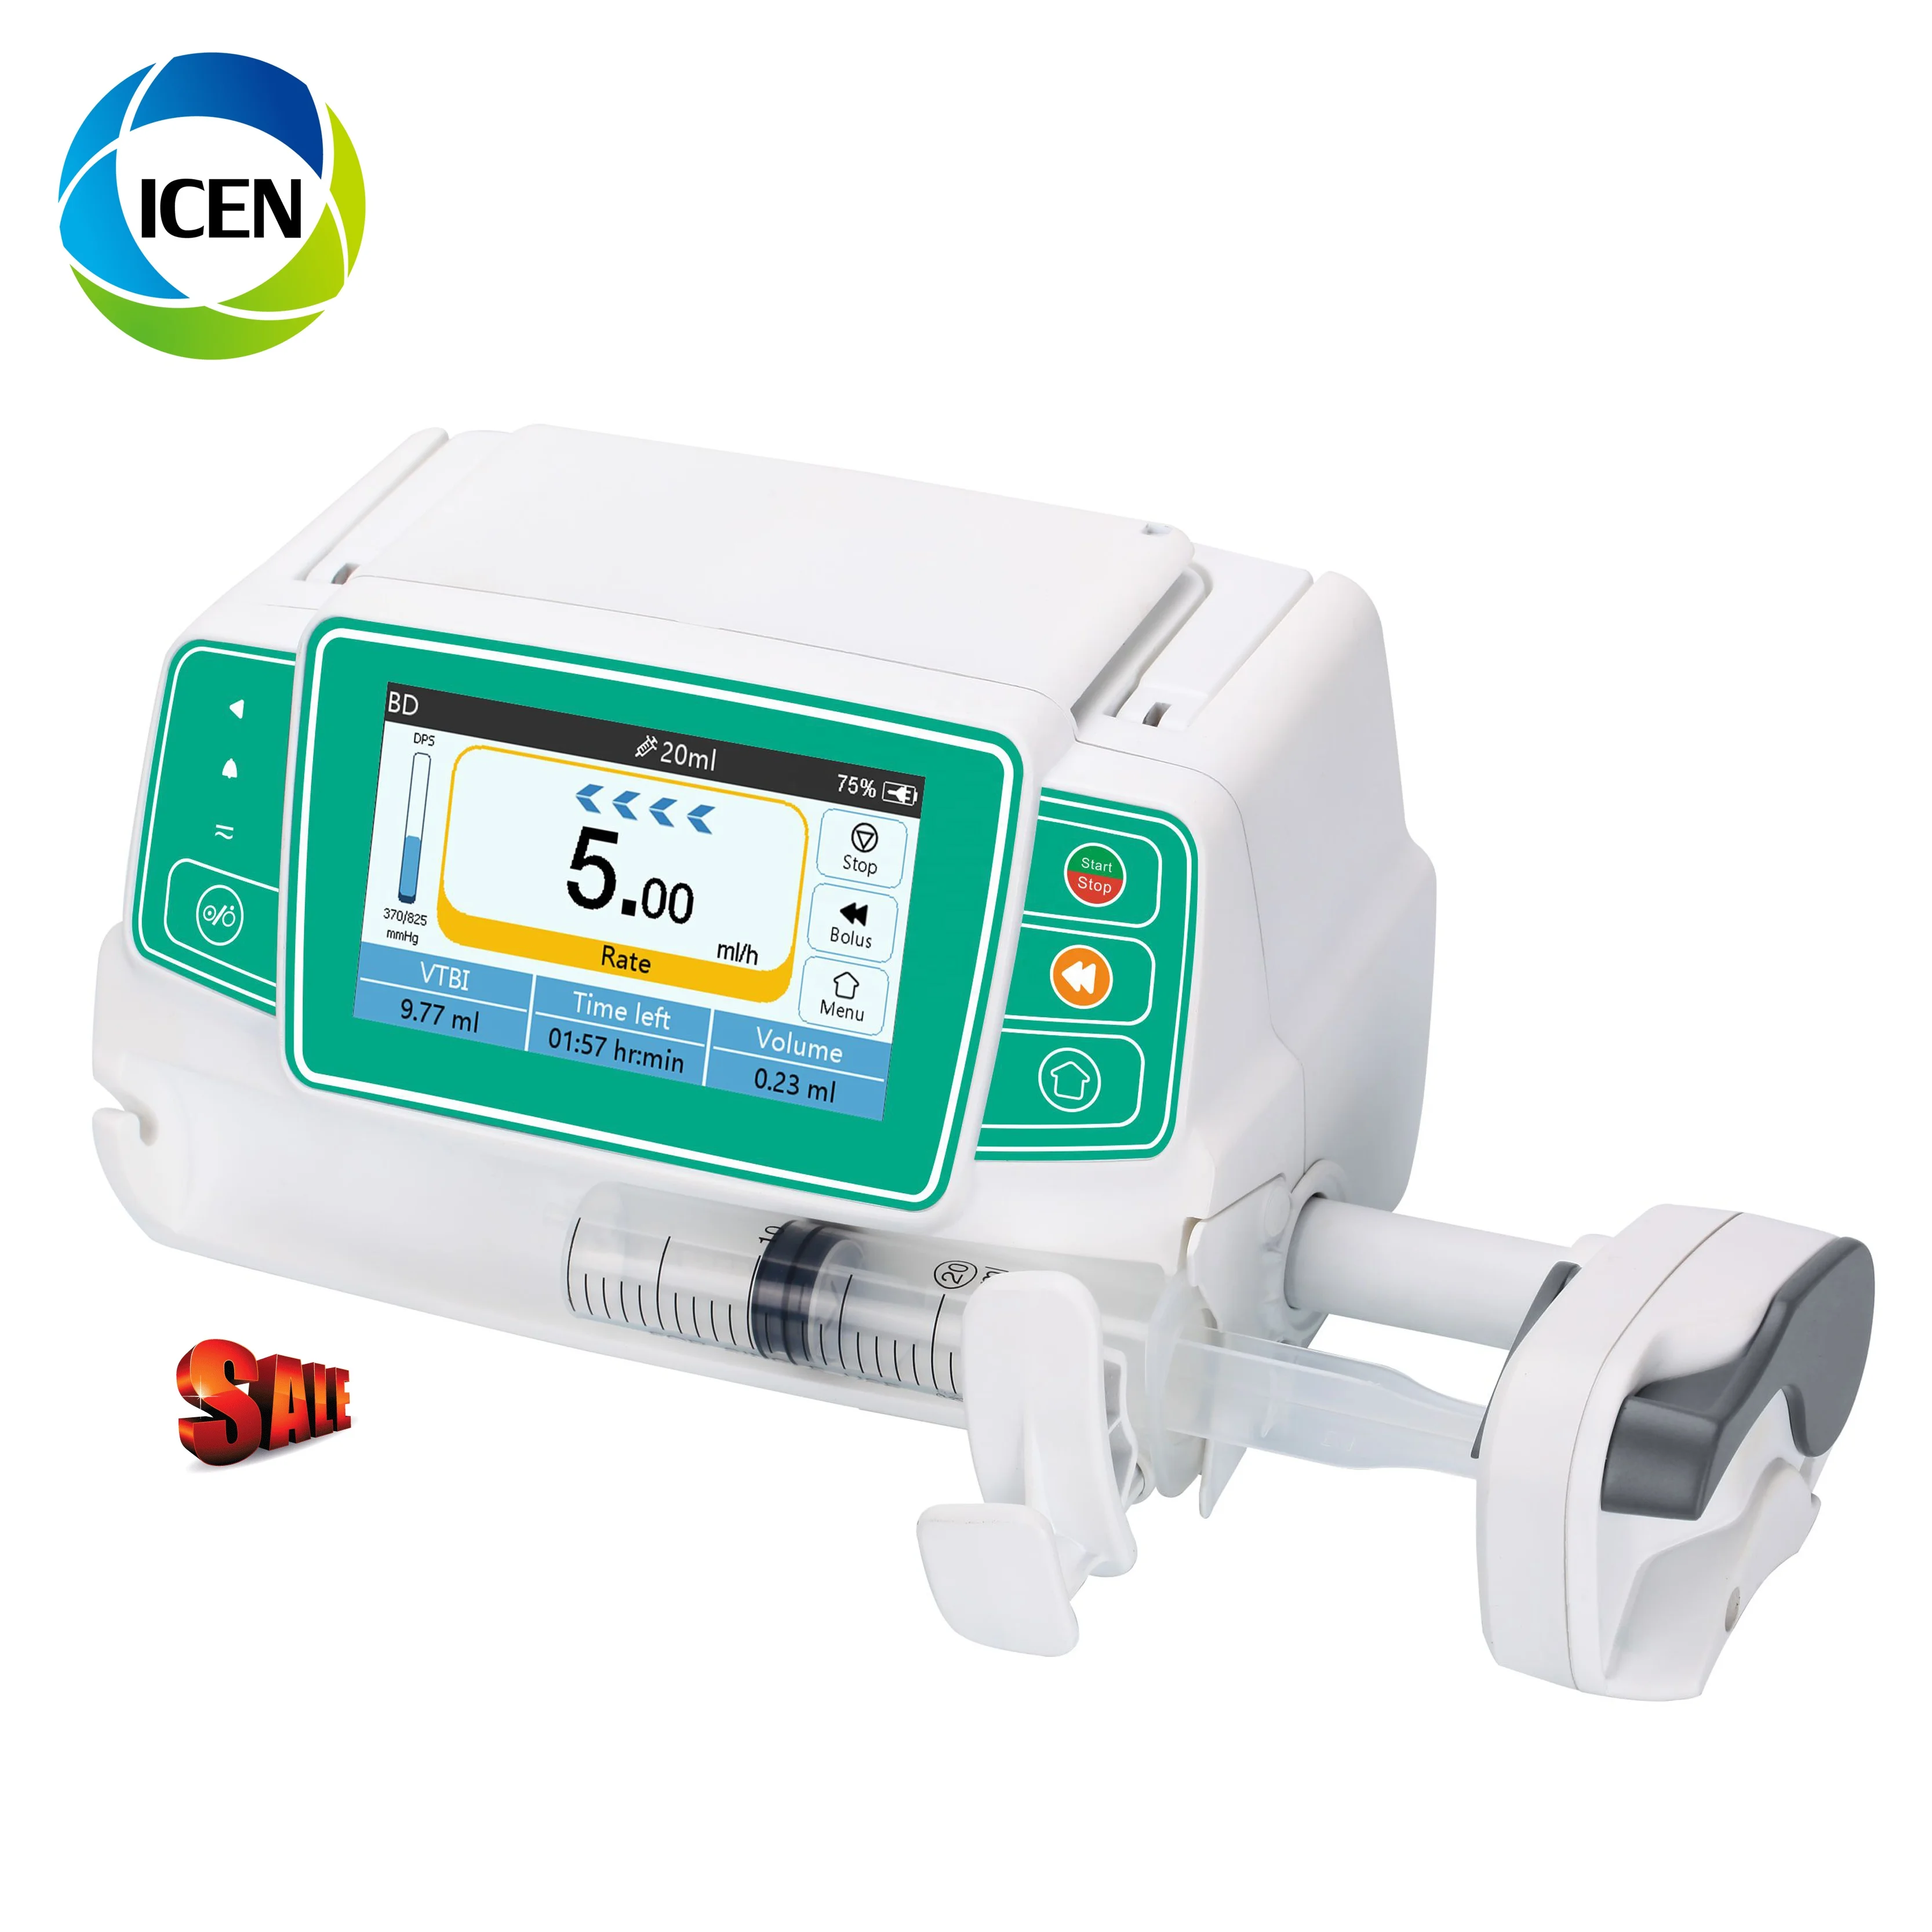 
IN-GS50 hospital medical equipment syringe infusion pump 